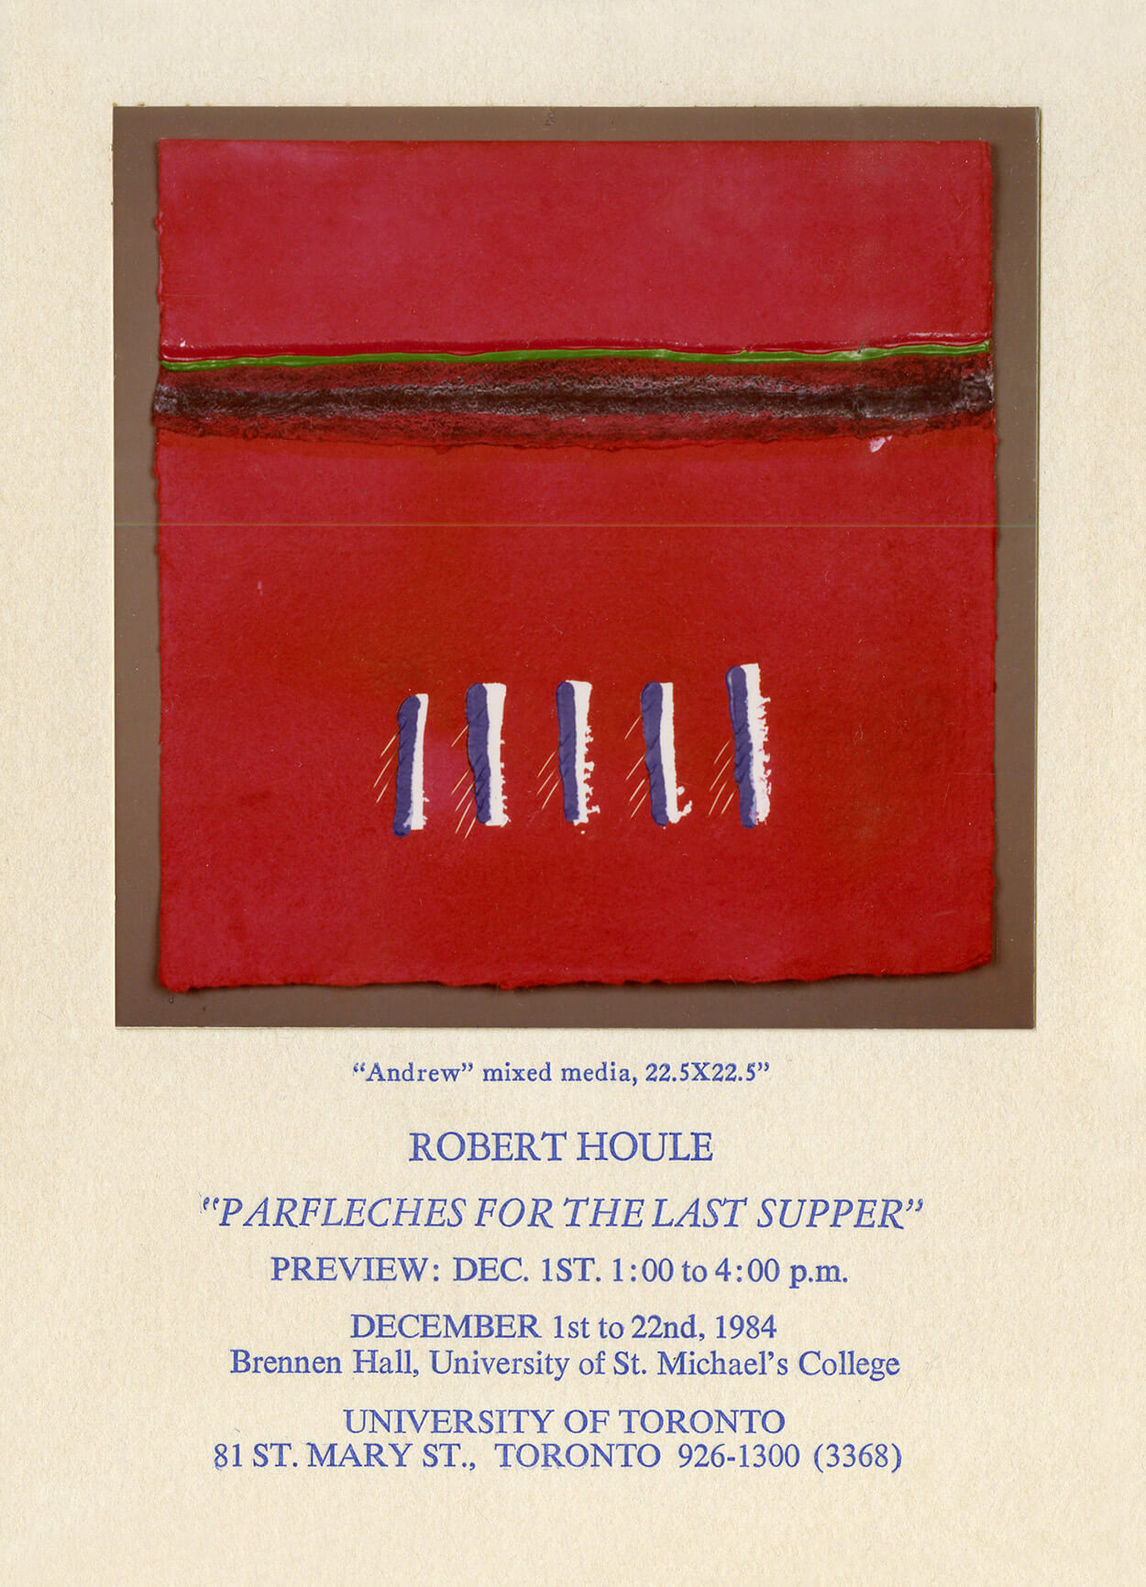 Invitation to Robert Houle’s first solo exhibition, 1984